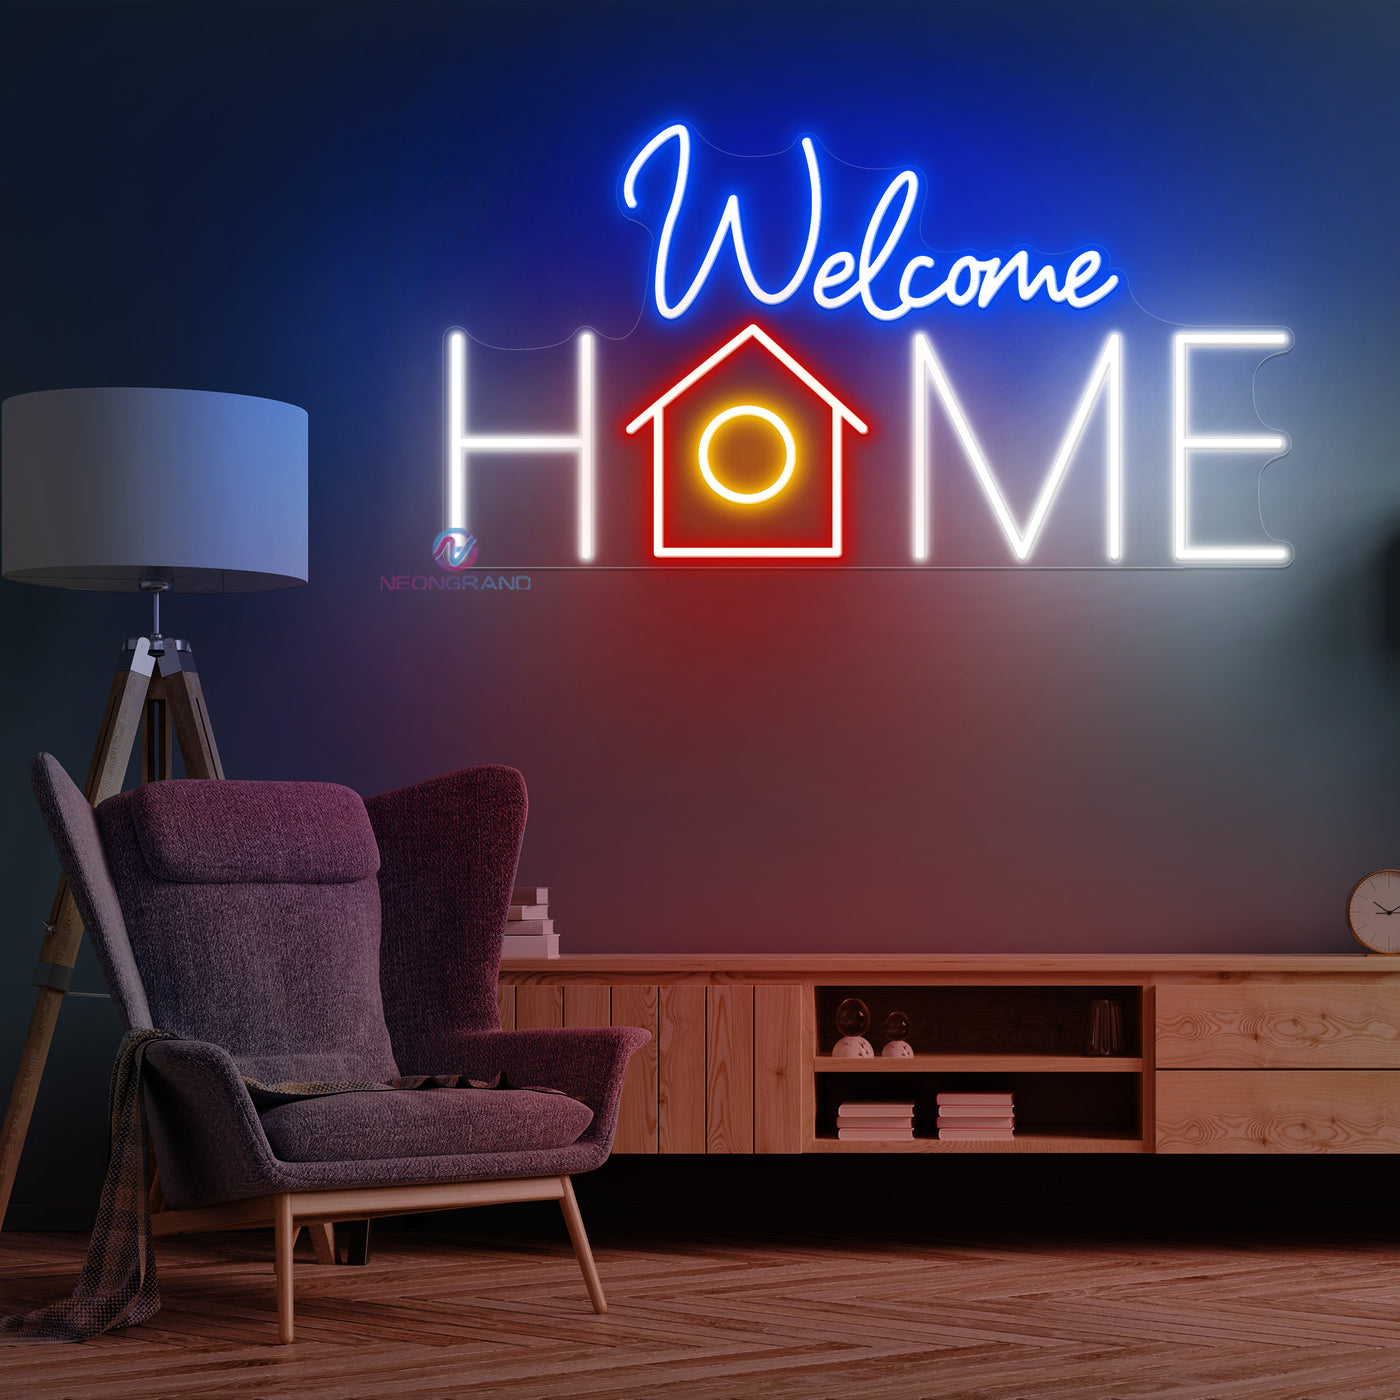 Welcome Home Neon Sign Led Light blue